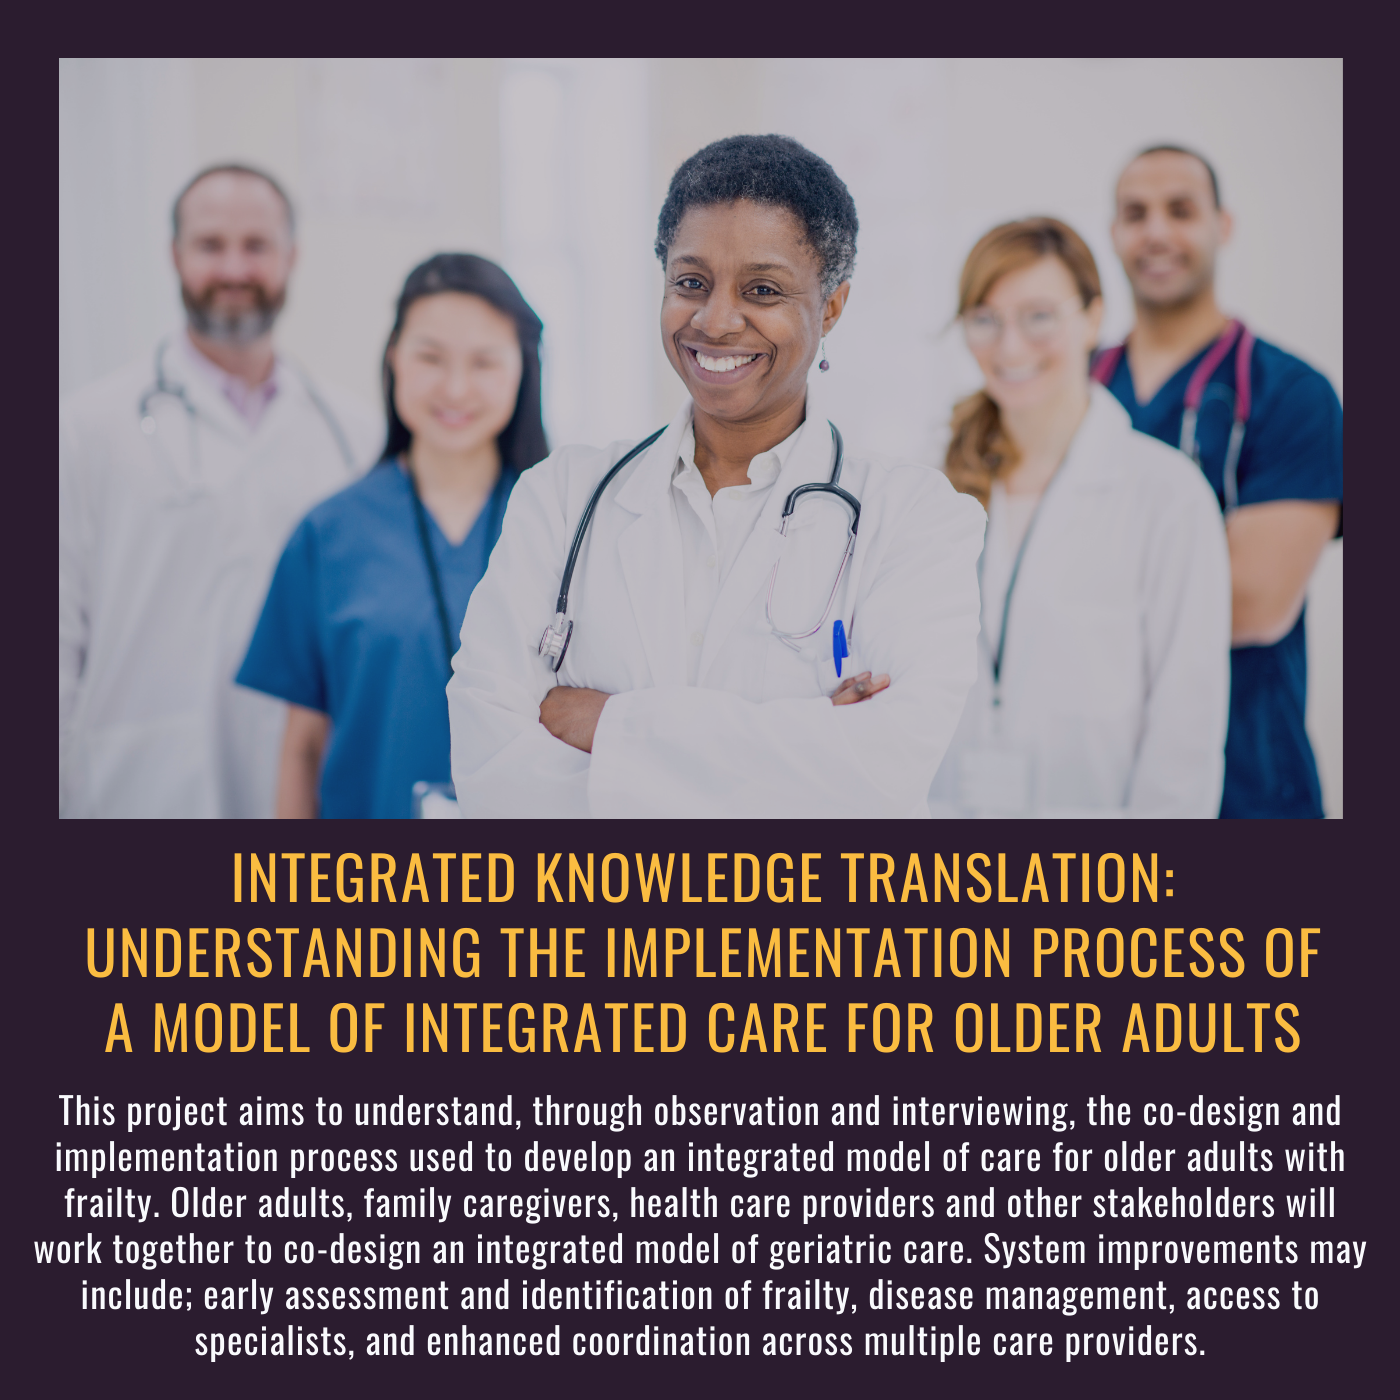 Integrated Knowledge Translation: Understanding the implementation process of a model of integrated care for older adults. This project aims to understand, through observation and interviewing, the co-design and implementation process used to develop an integrated model of care for older adults with frailty. Older adults, family caregivers, health care providers and other stakeholders will work together to co-design an integrated model of geriatric care. System improvements may include; early assessment and identification of frailty, disease management, access to specialist, and enhanced coordination across multiple care providers. Picture of a diverse group of healthcare providers facing the camera